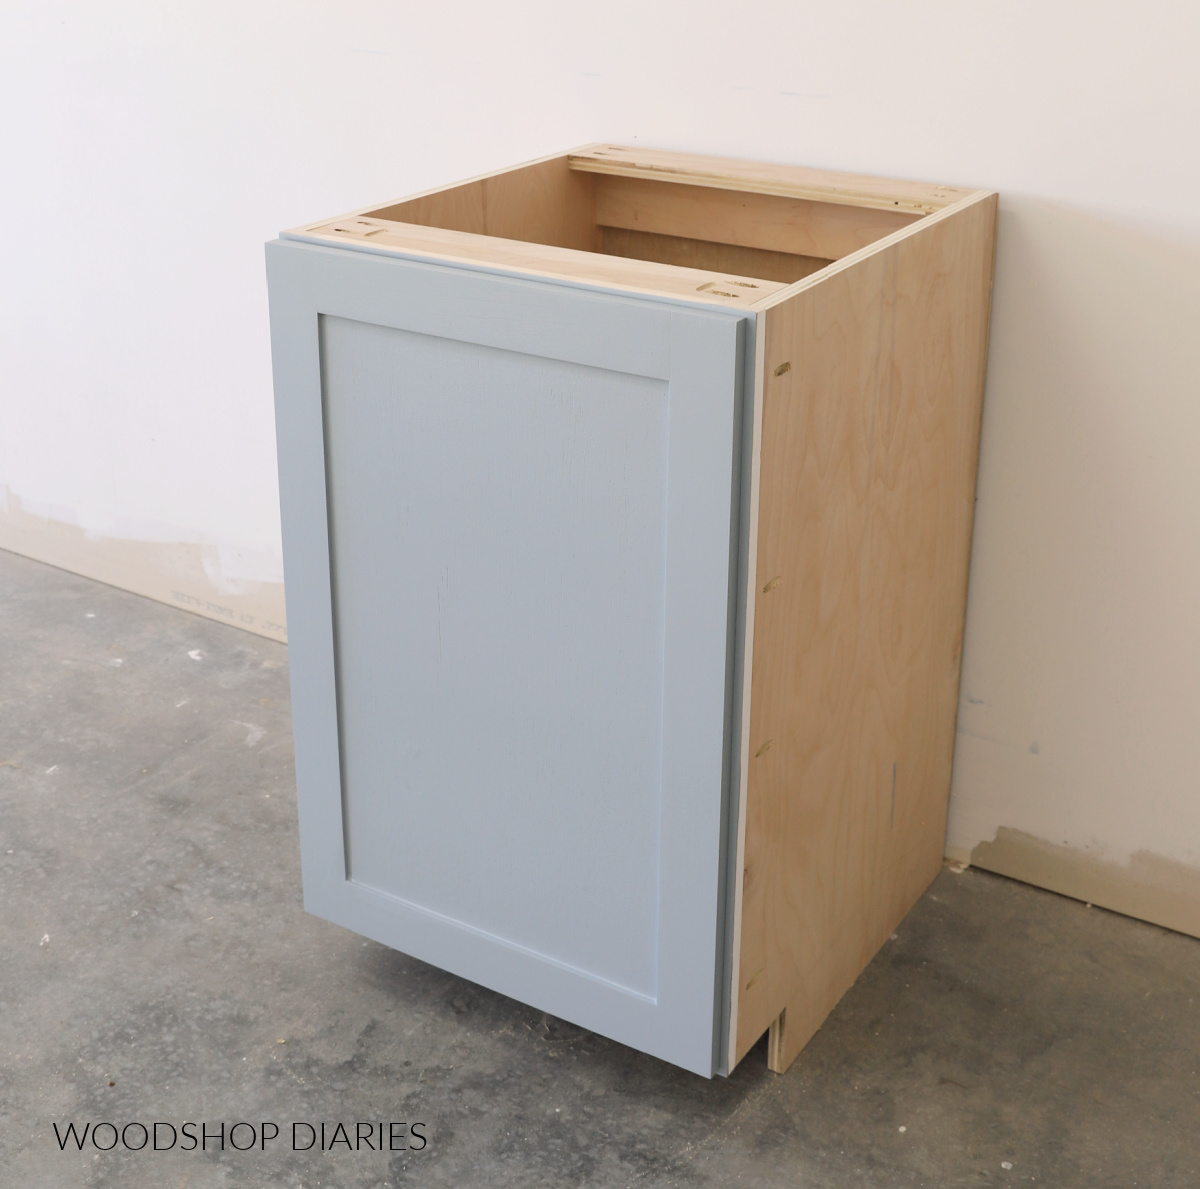 Simple base cabinet with shaker style door